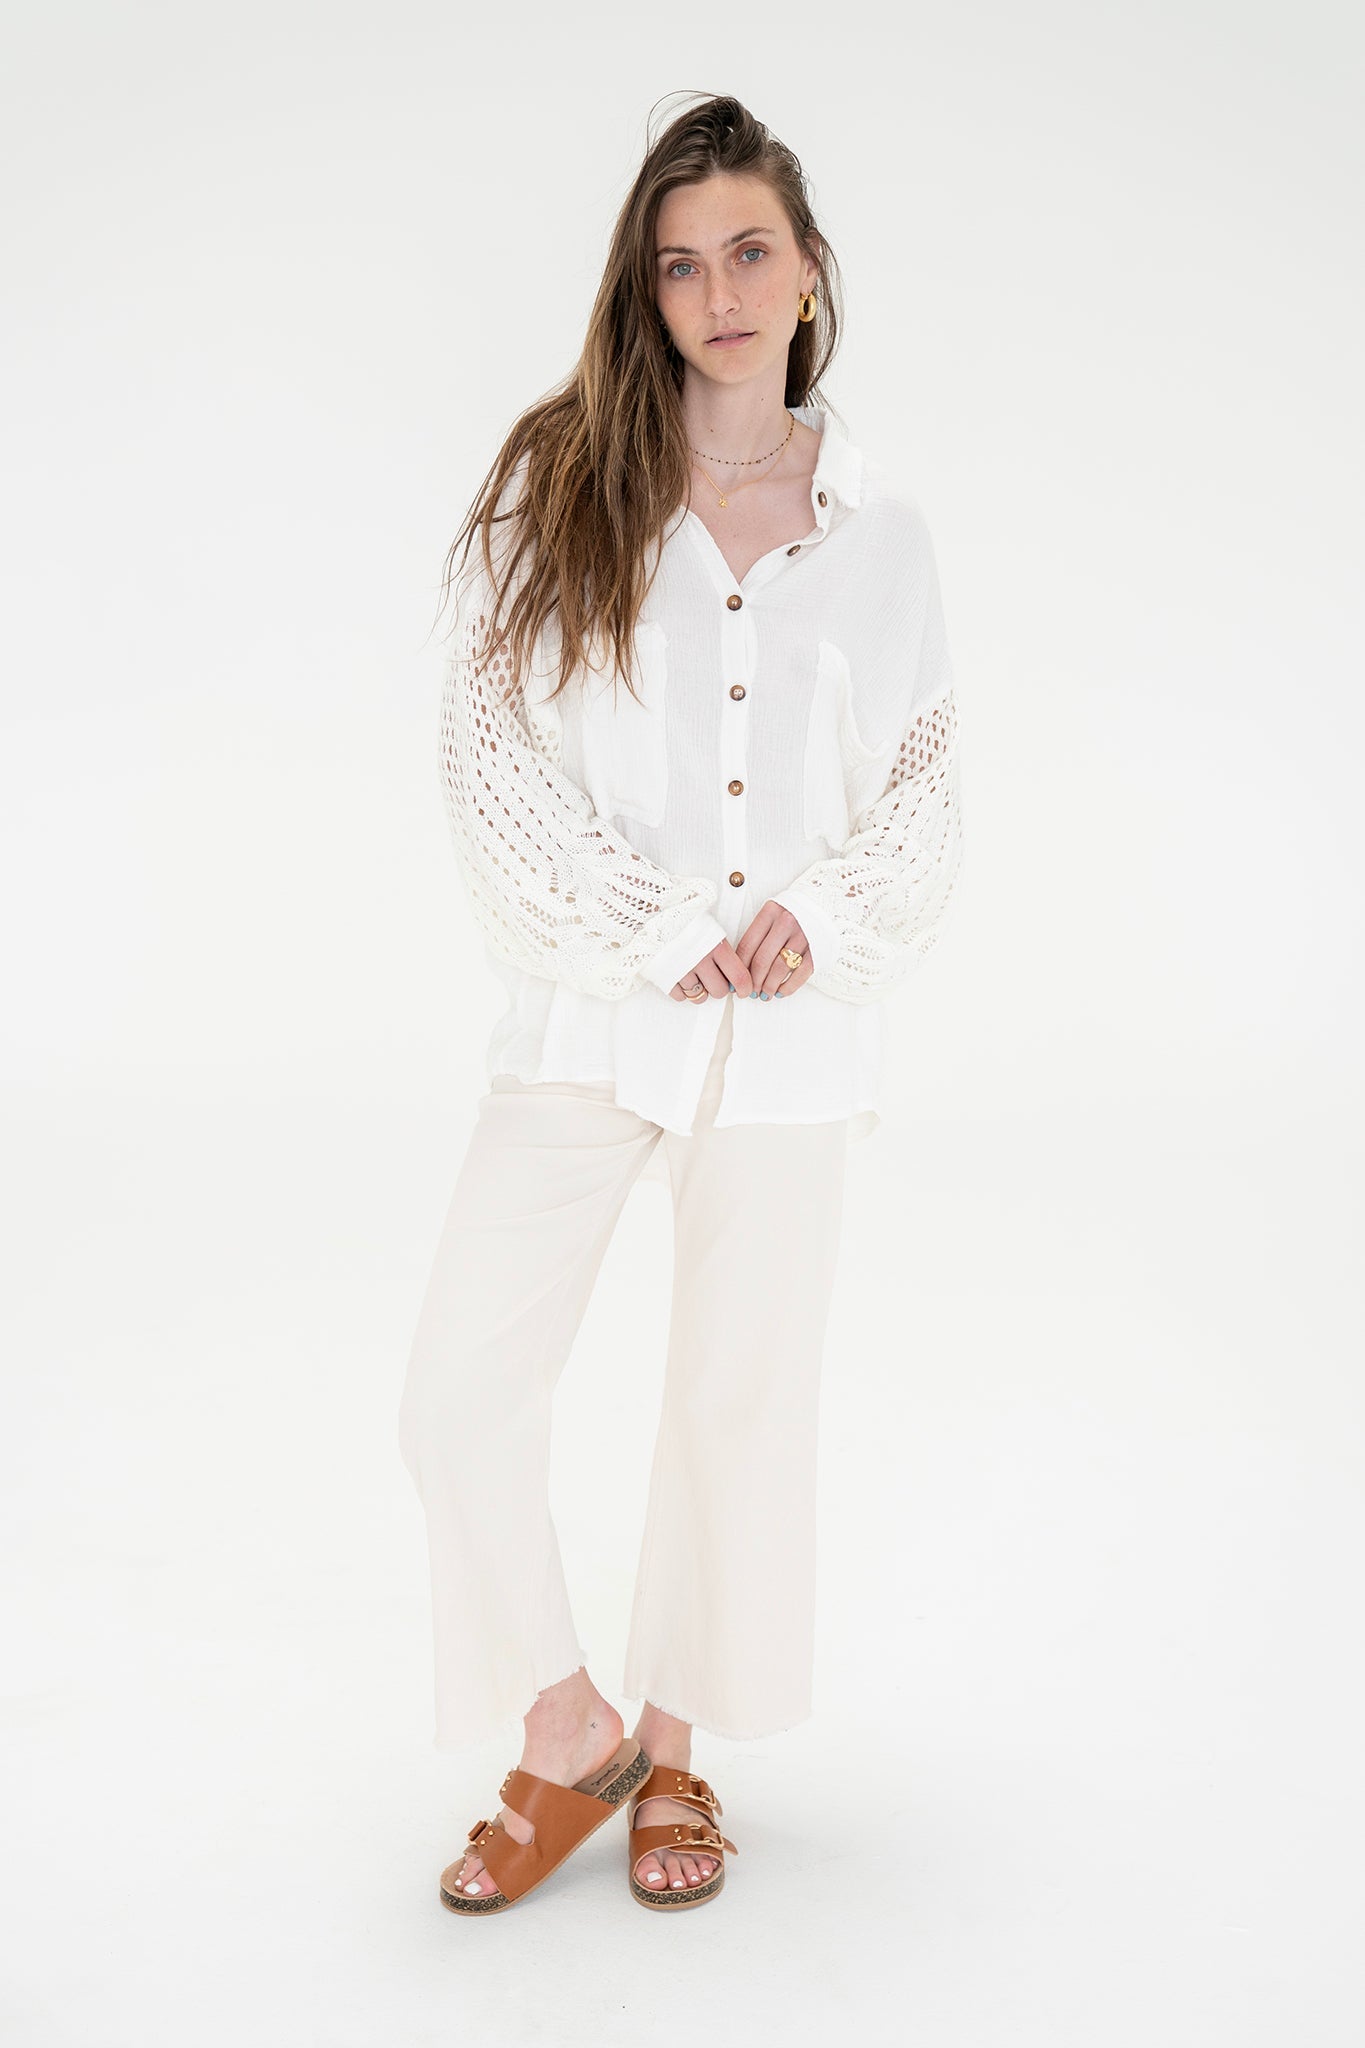 View 10 of Wisteria Cardigan in Off White, a Sweaters from Larrea Cove. Detail: .